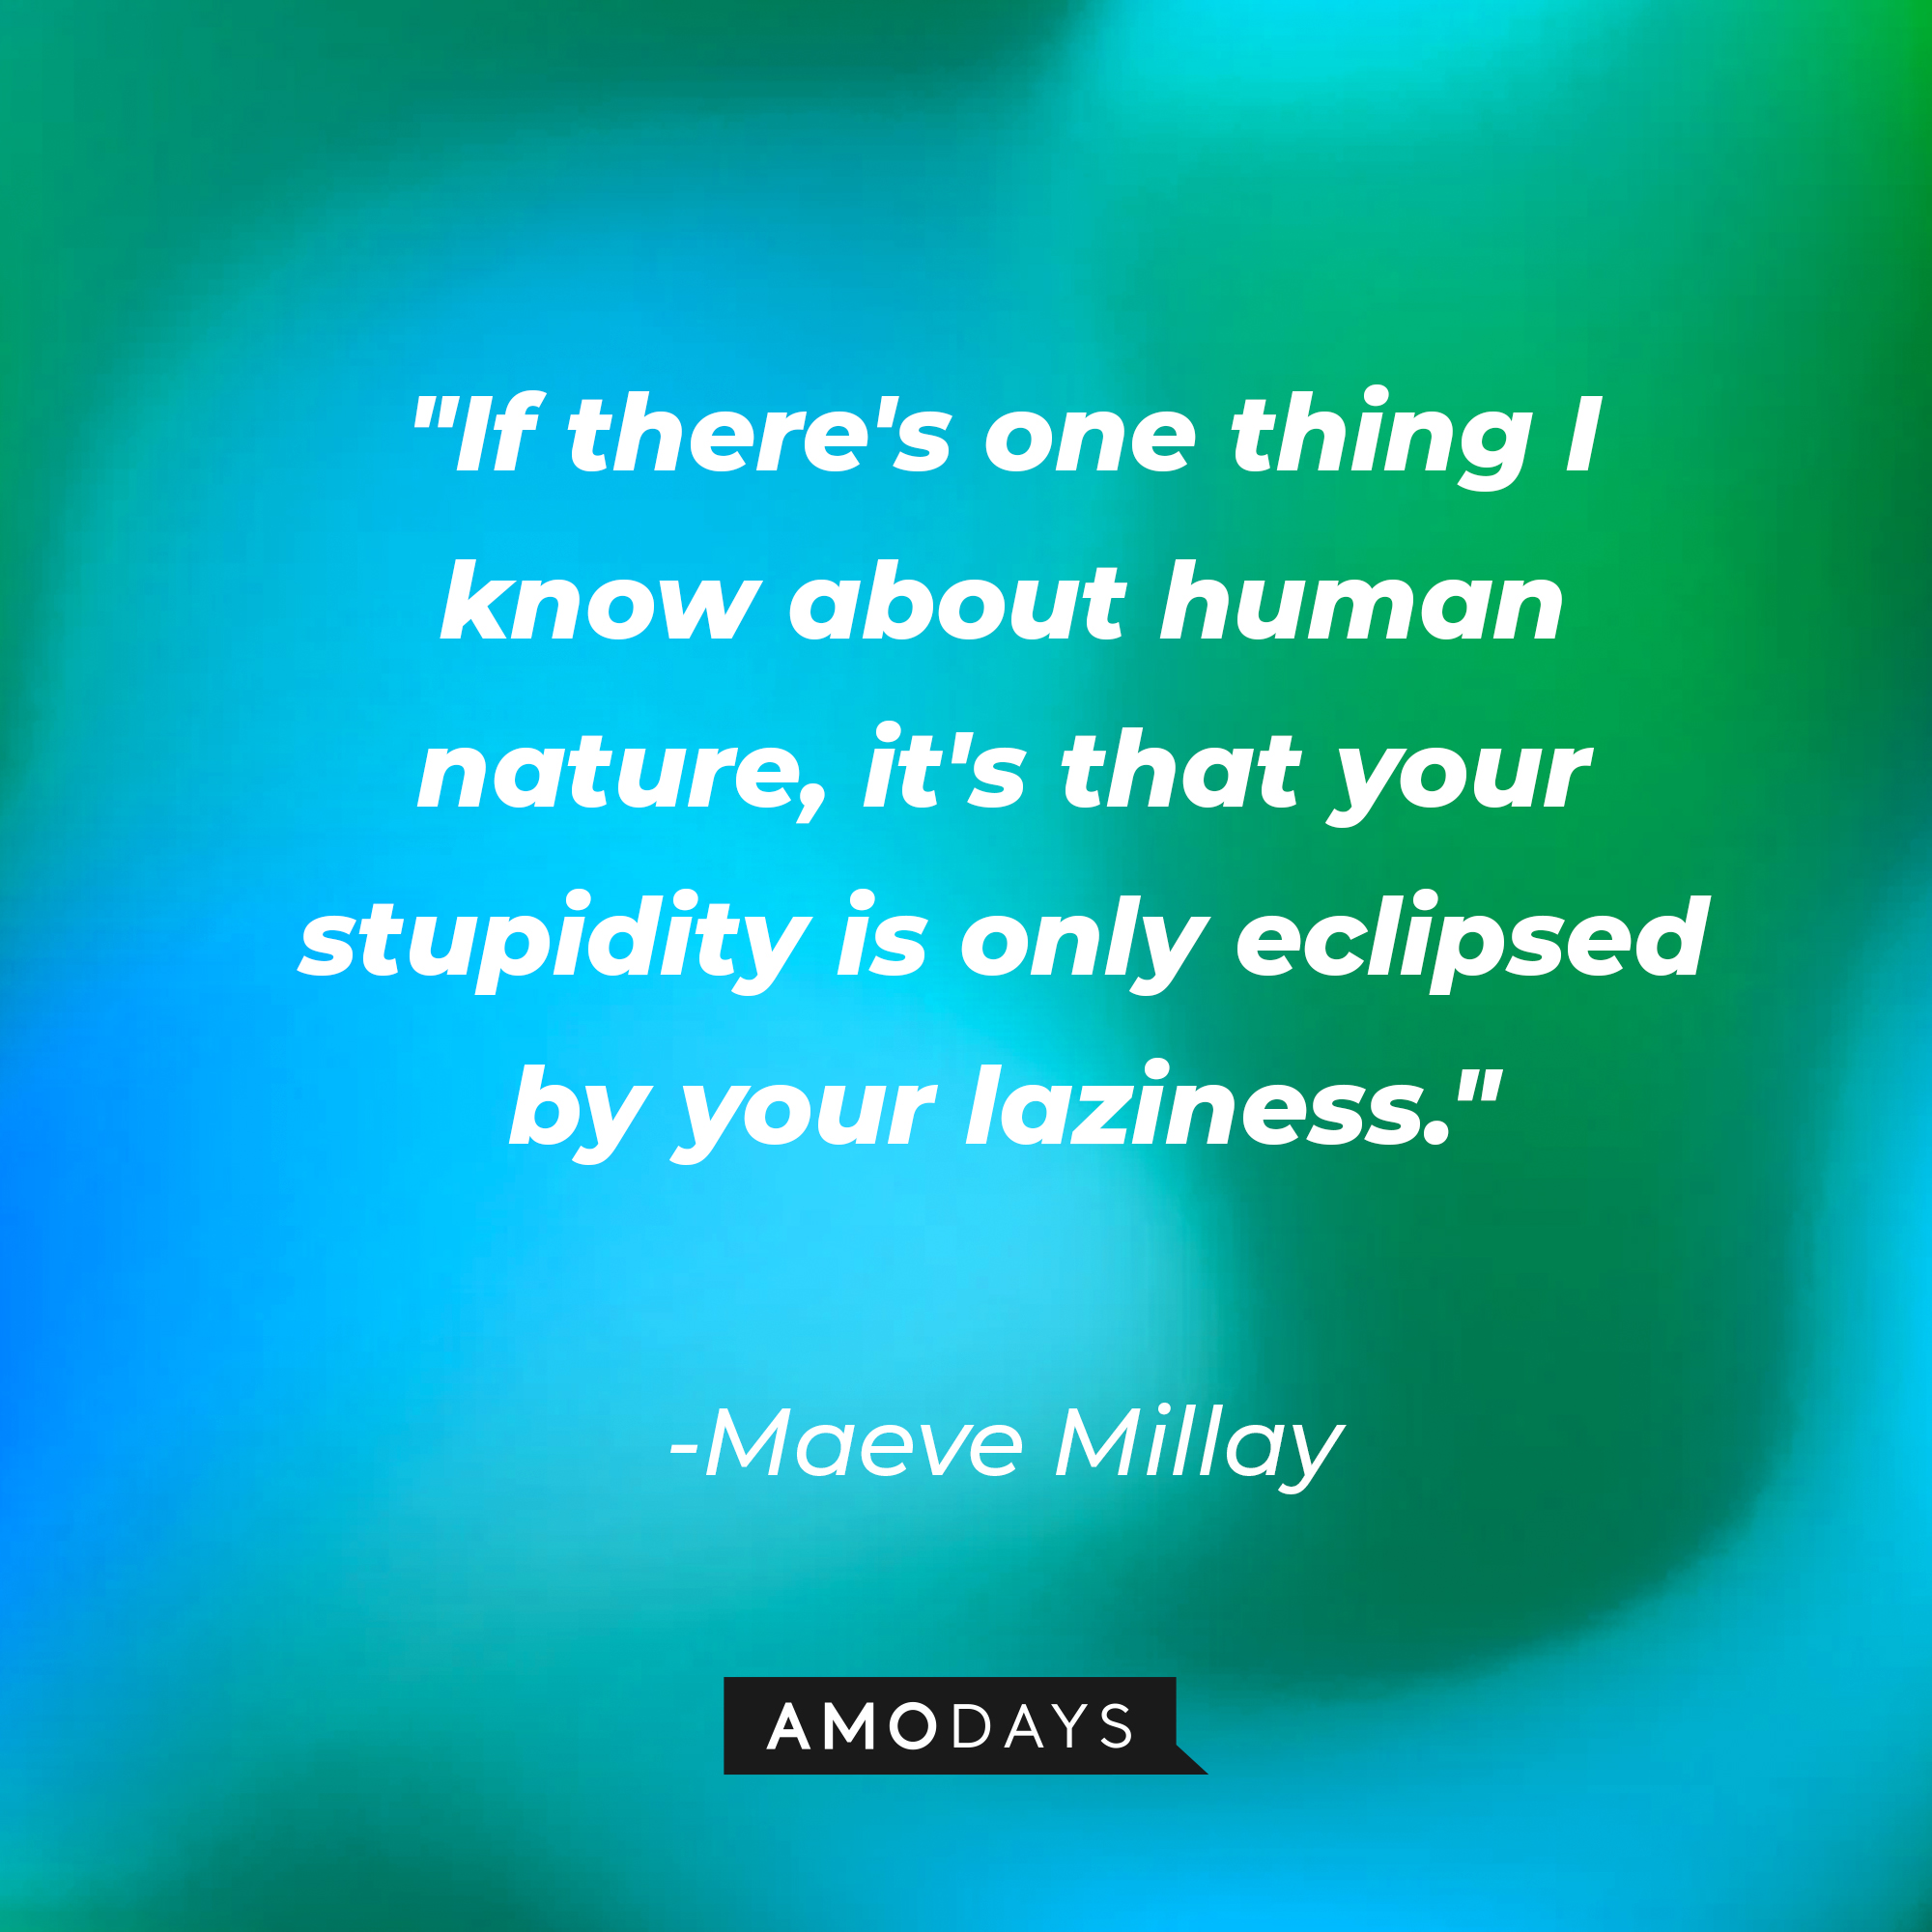 Maeve Millay's quote: "If there's one thing I know about human nature, it's that your stupidity is only eclipsed by your laziness." | Source: AmoDays